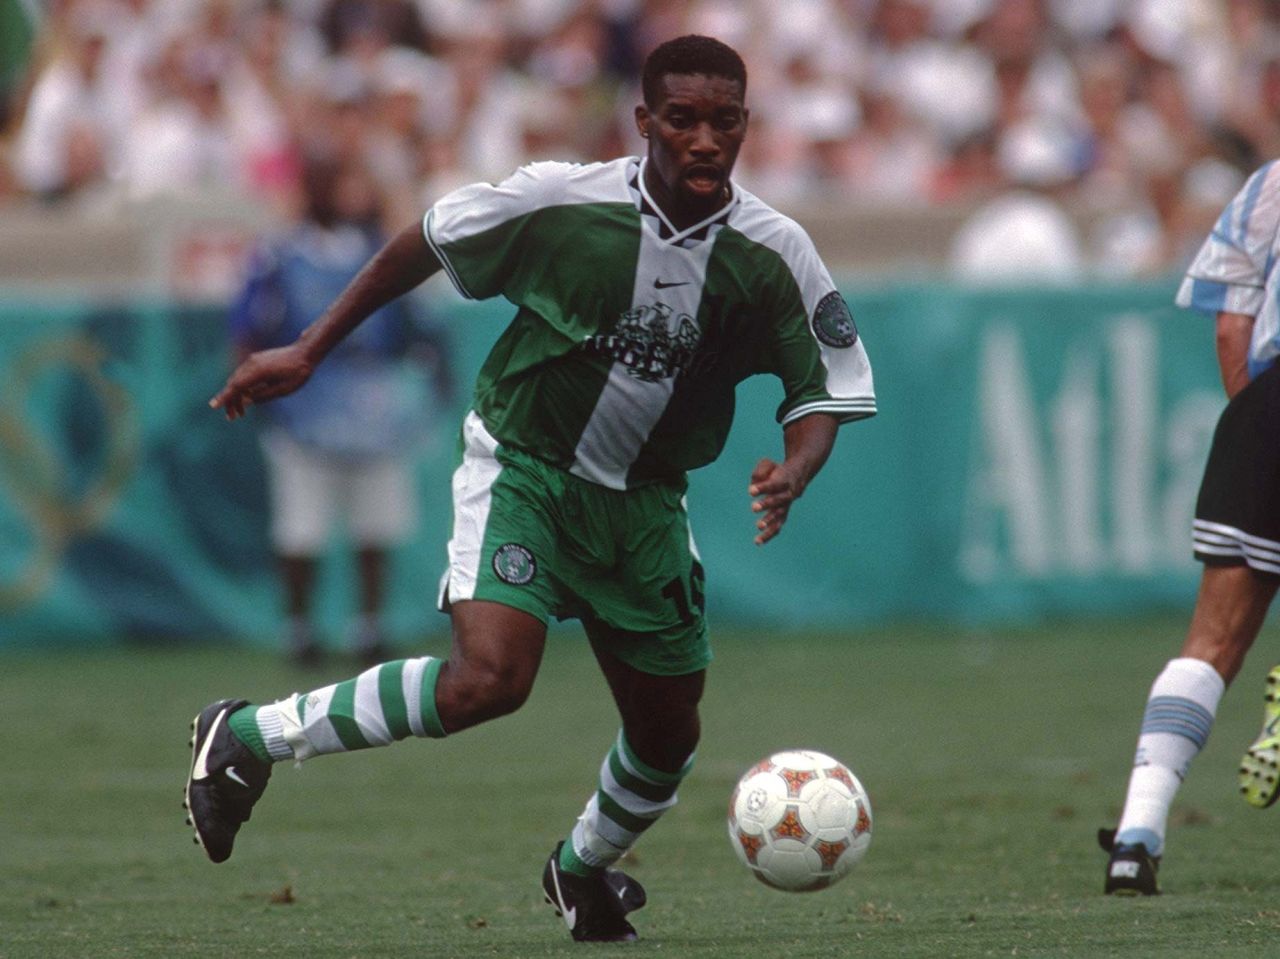 Midfielder Jay-Jay Okocha played for Paris St Germain and joined EPL team Bolton Wanderers in 2002, where he was given the captain's armband. Heralded for his flair, Okocha became a cult hero in England, earning the moniker, "Jay-Jay, so good they named him twice."